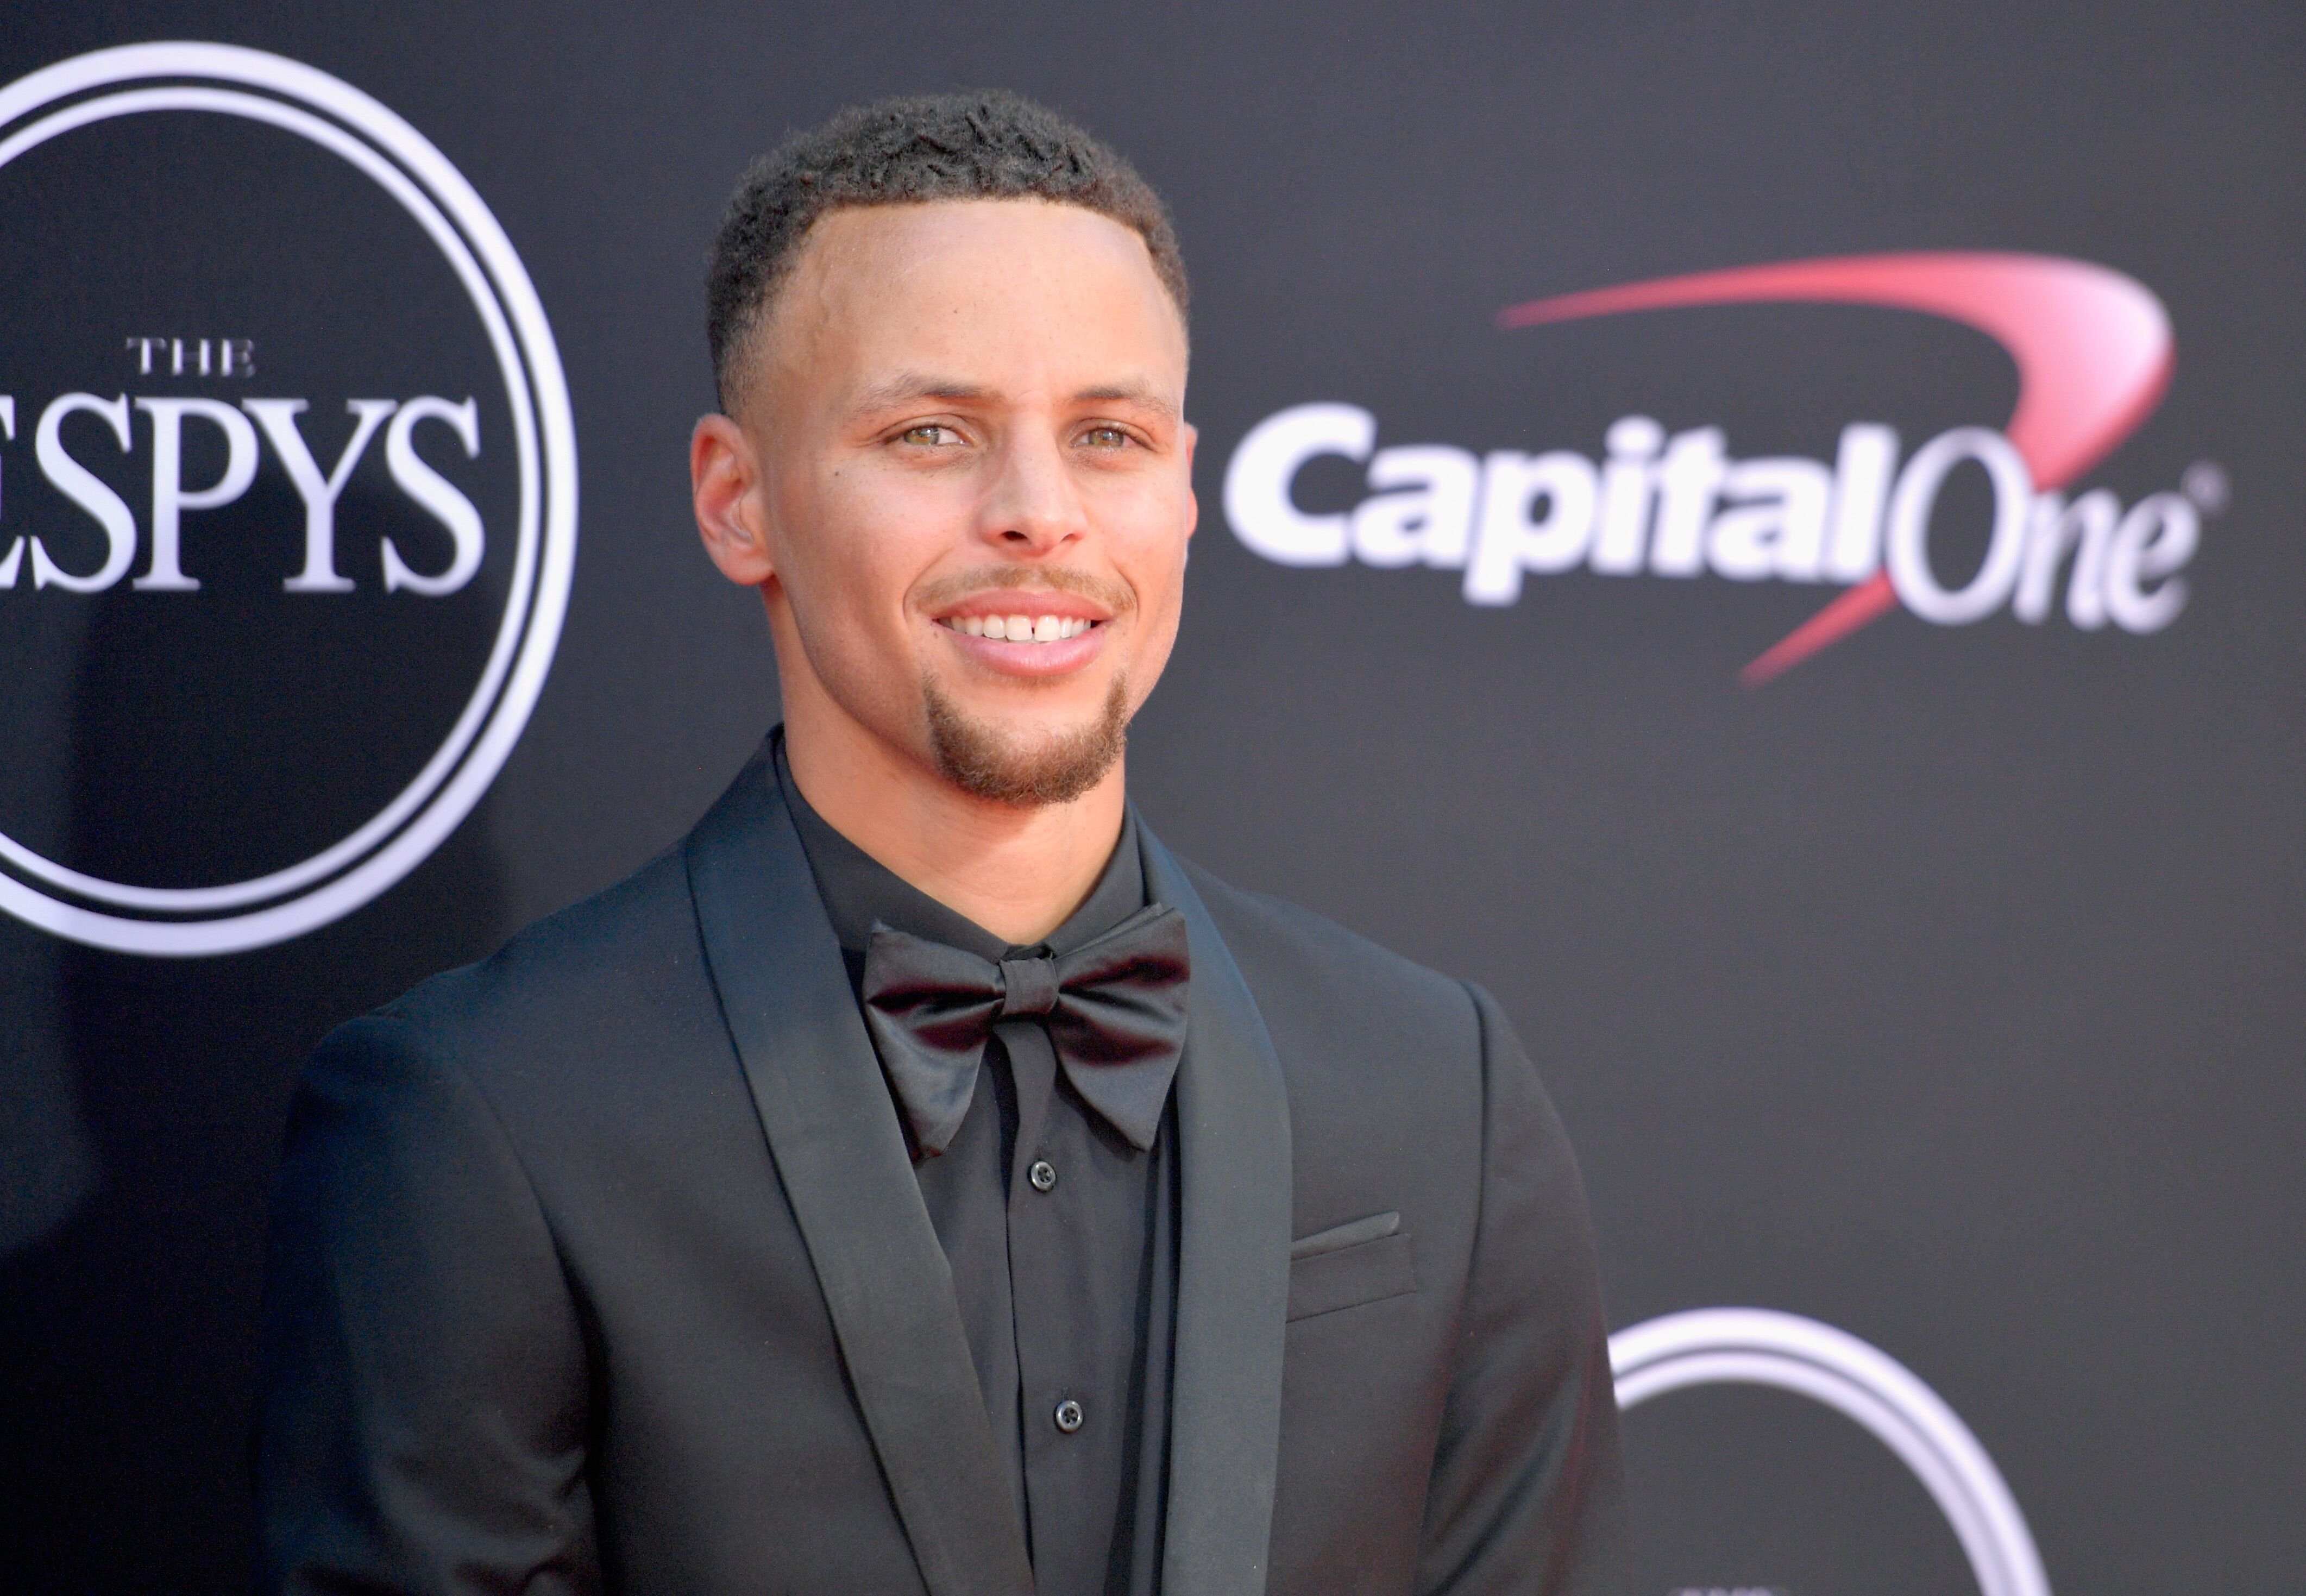 Steph Curry attends The 2017 ESPYS at Microsoft Theater on July 12, 2017. | Source: Getty Images